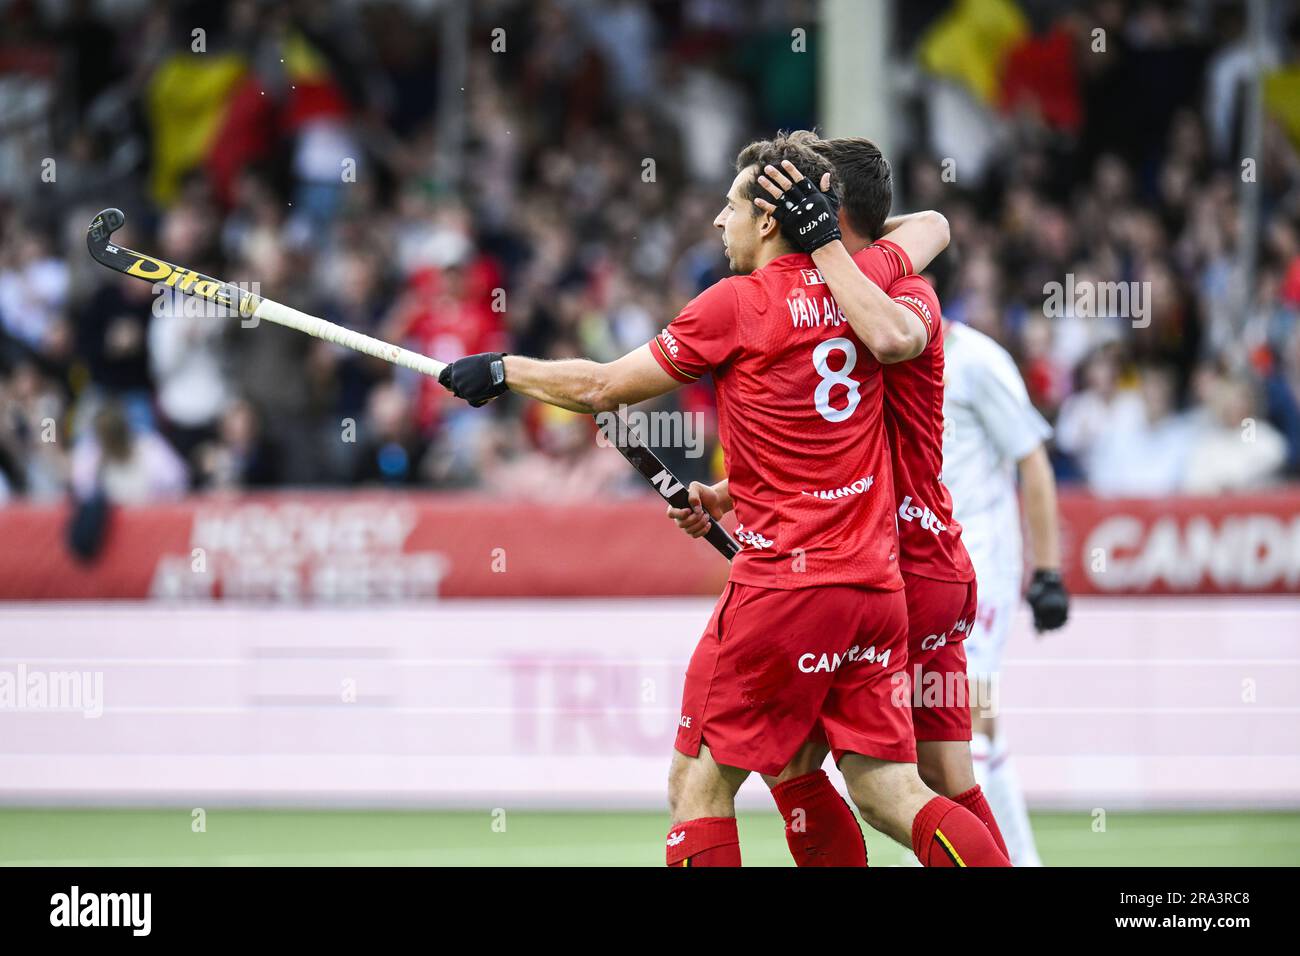 Antwerp, Belgium. 30th June, 2023. Belgium's Florent van Aubel celebrates  after scoring during a hockey game between Belgian national team Red Lions  and Spain, match 9/12 in the group stage of the